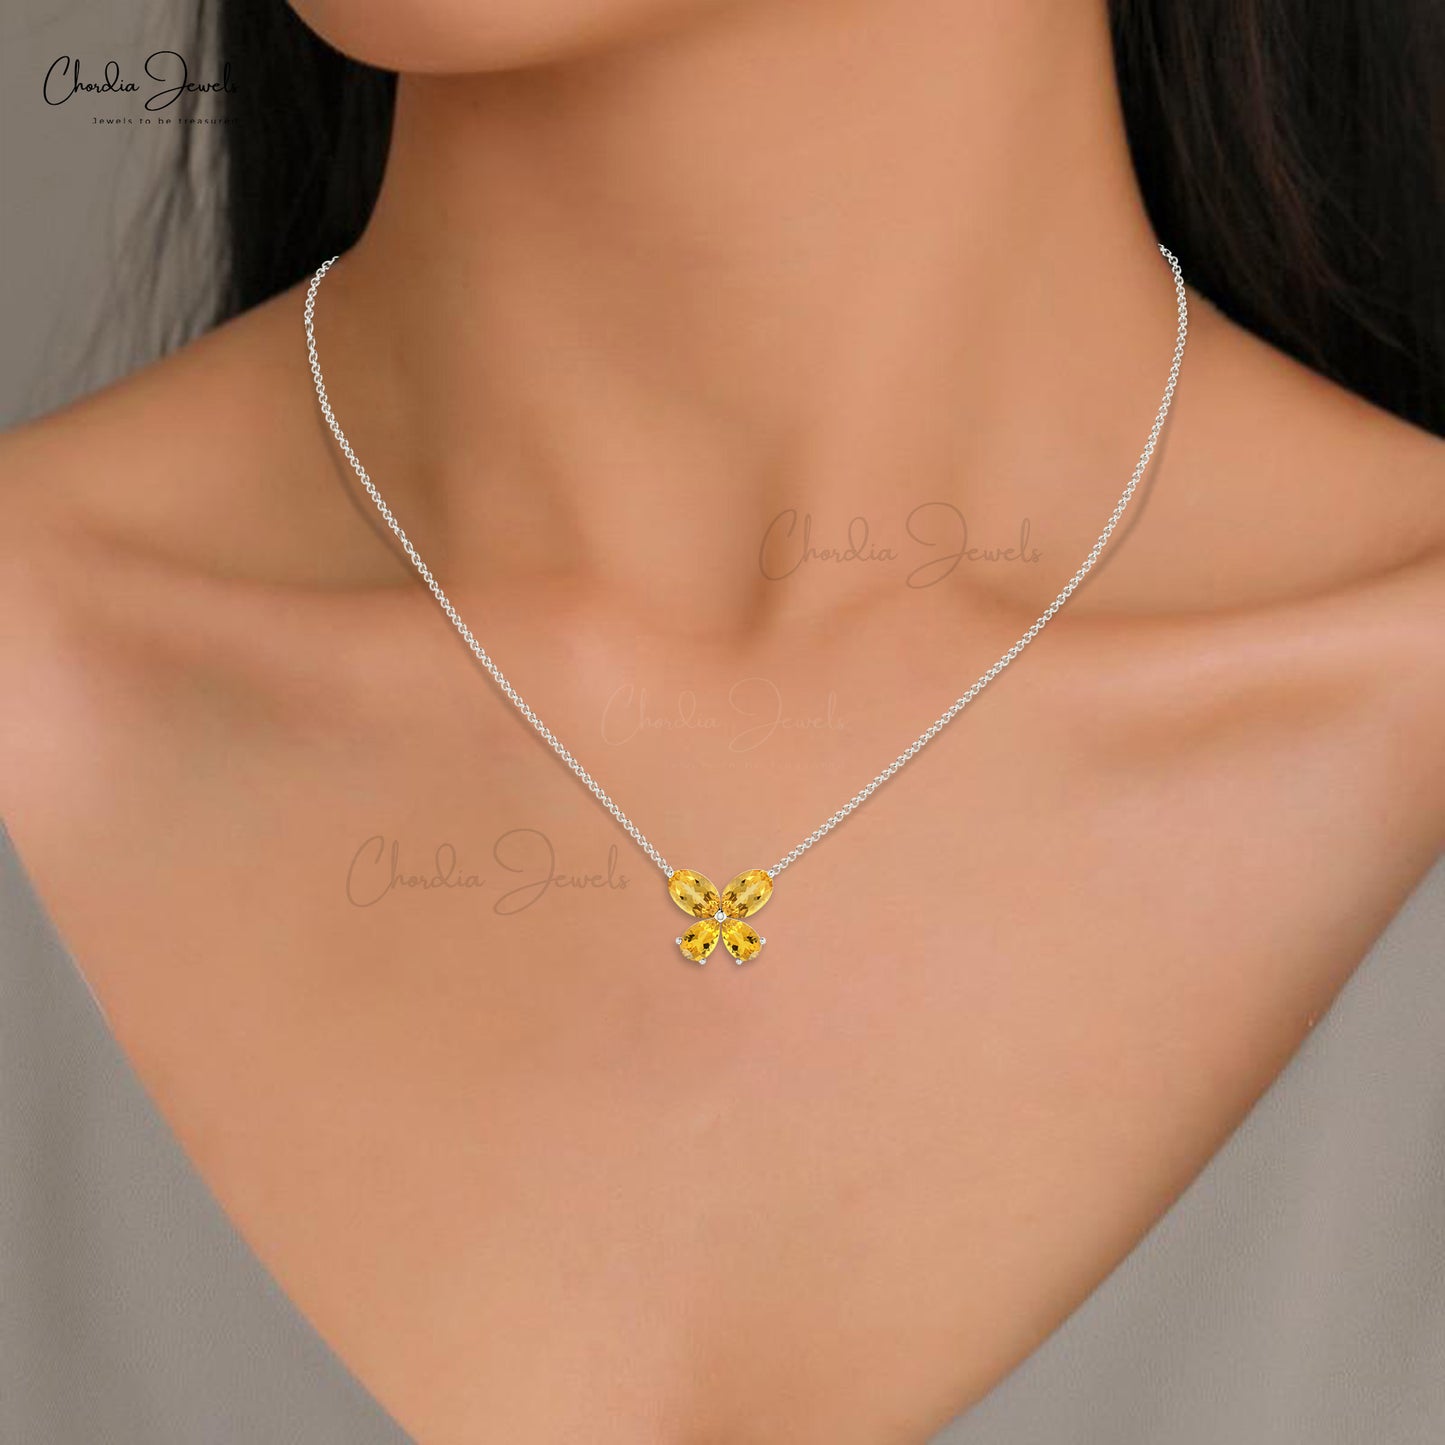 Solid 14k Gold Butterfly Necklace Genuine 1.2ct Citrine Delicate Necklace For Mother's Day